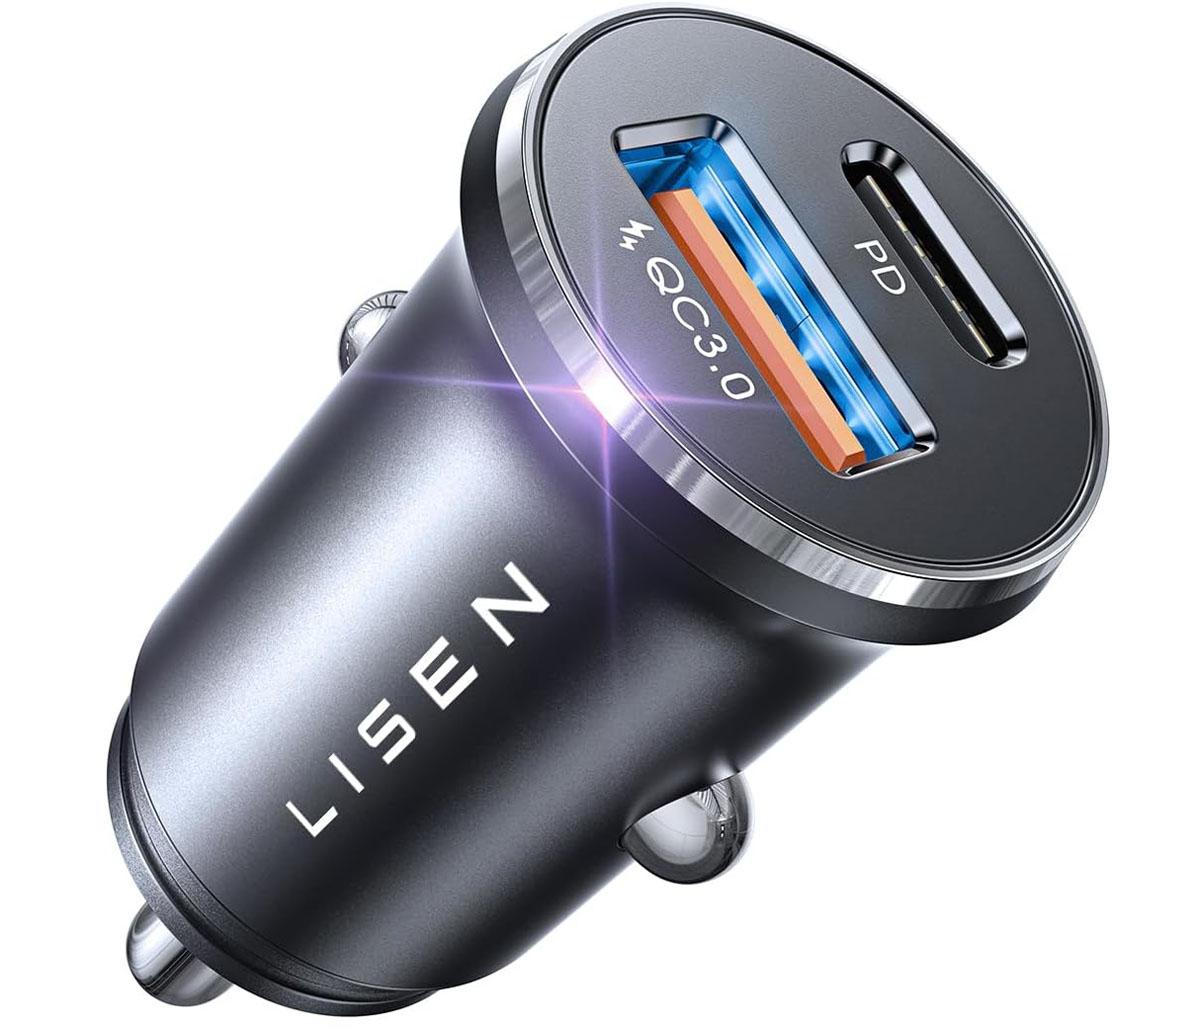 Lisen USB-C 48W Fast Charge Car Charger for $4.99